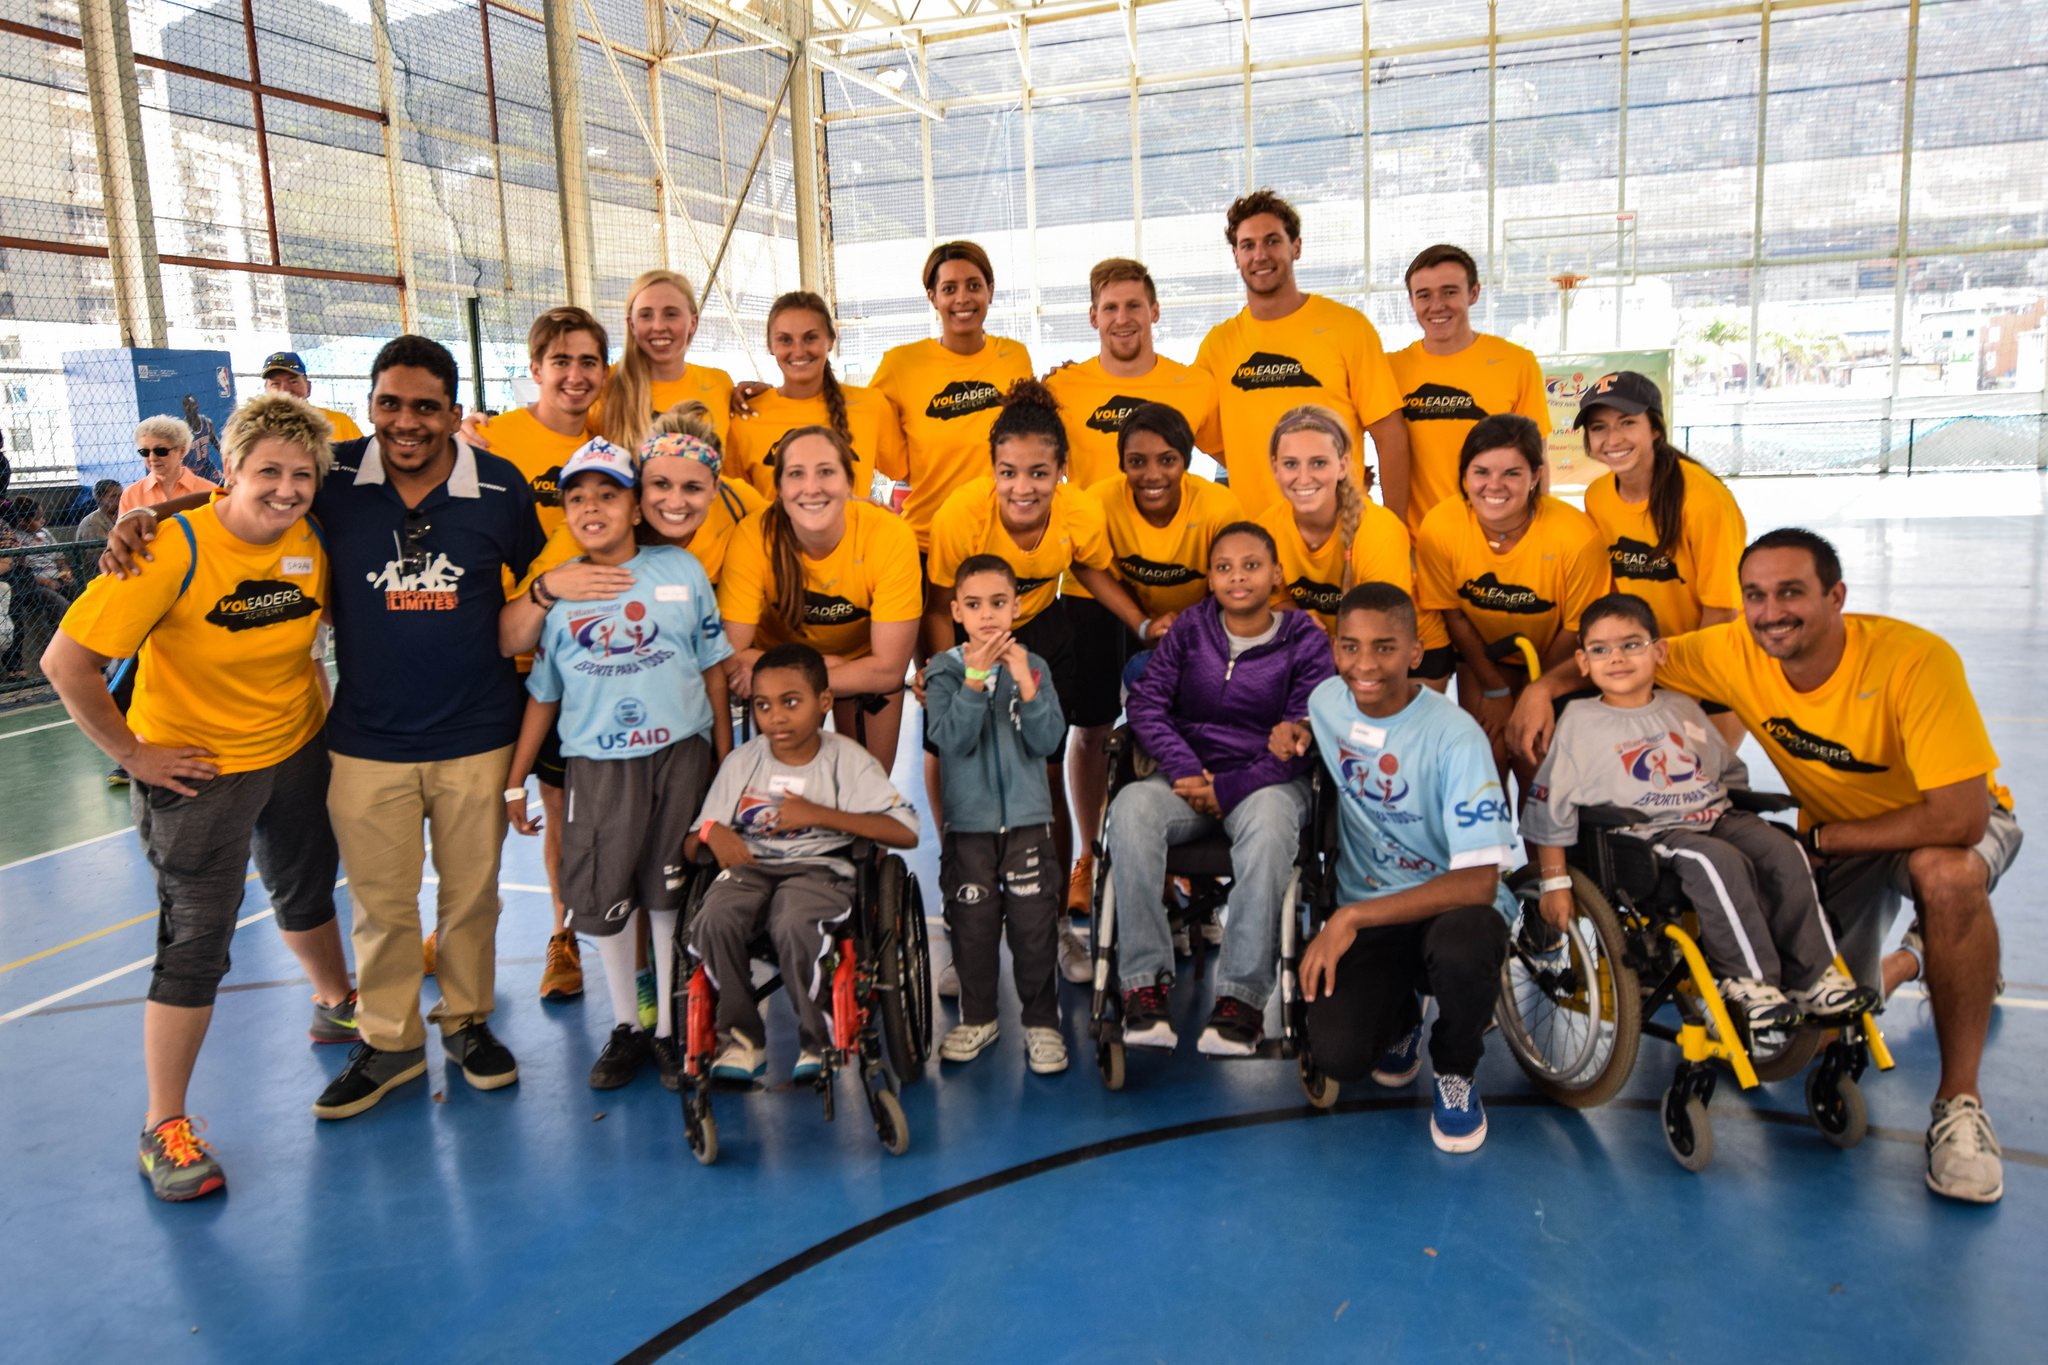 CSPS staff and student-athletes in the 2016 VOLeaders class pose for a photo with participants in an adaptive sports clinic in Rio de Janeiro, Brazil